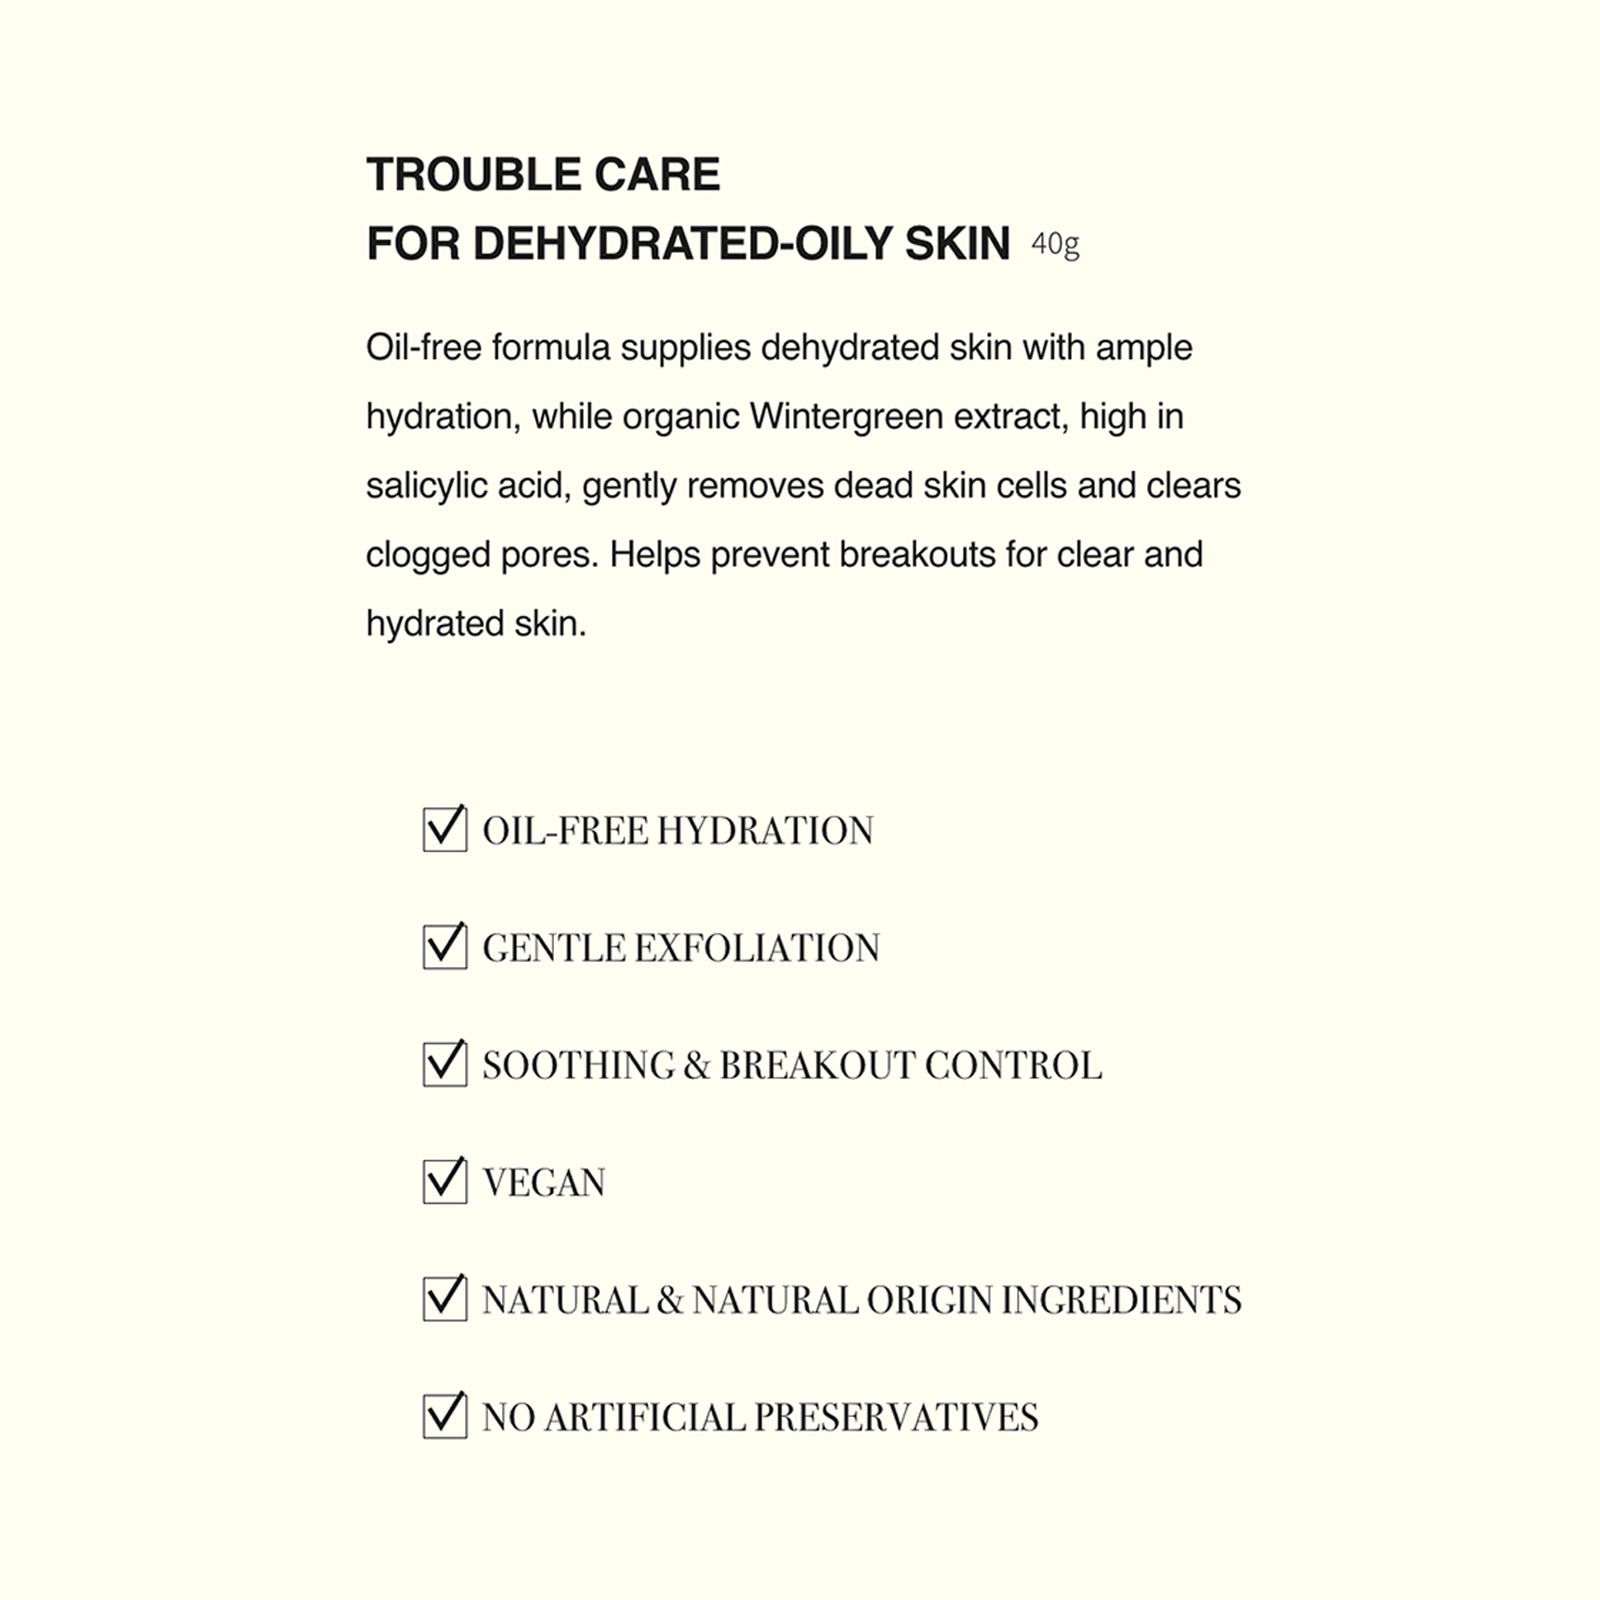 TOUN28 Trouble Care for Dehydrated-Oily Skin - Slowrecipe